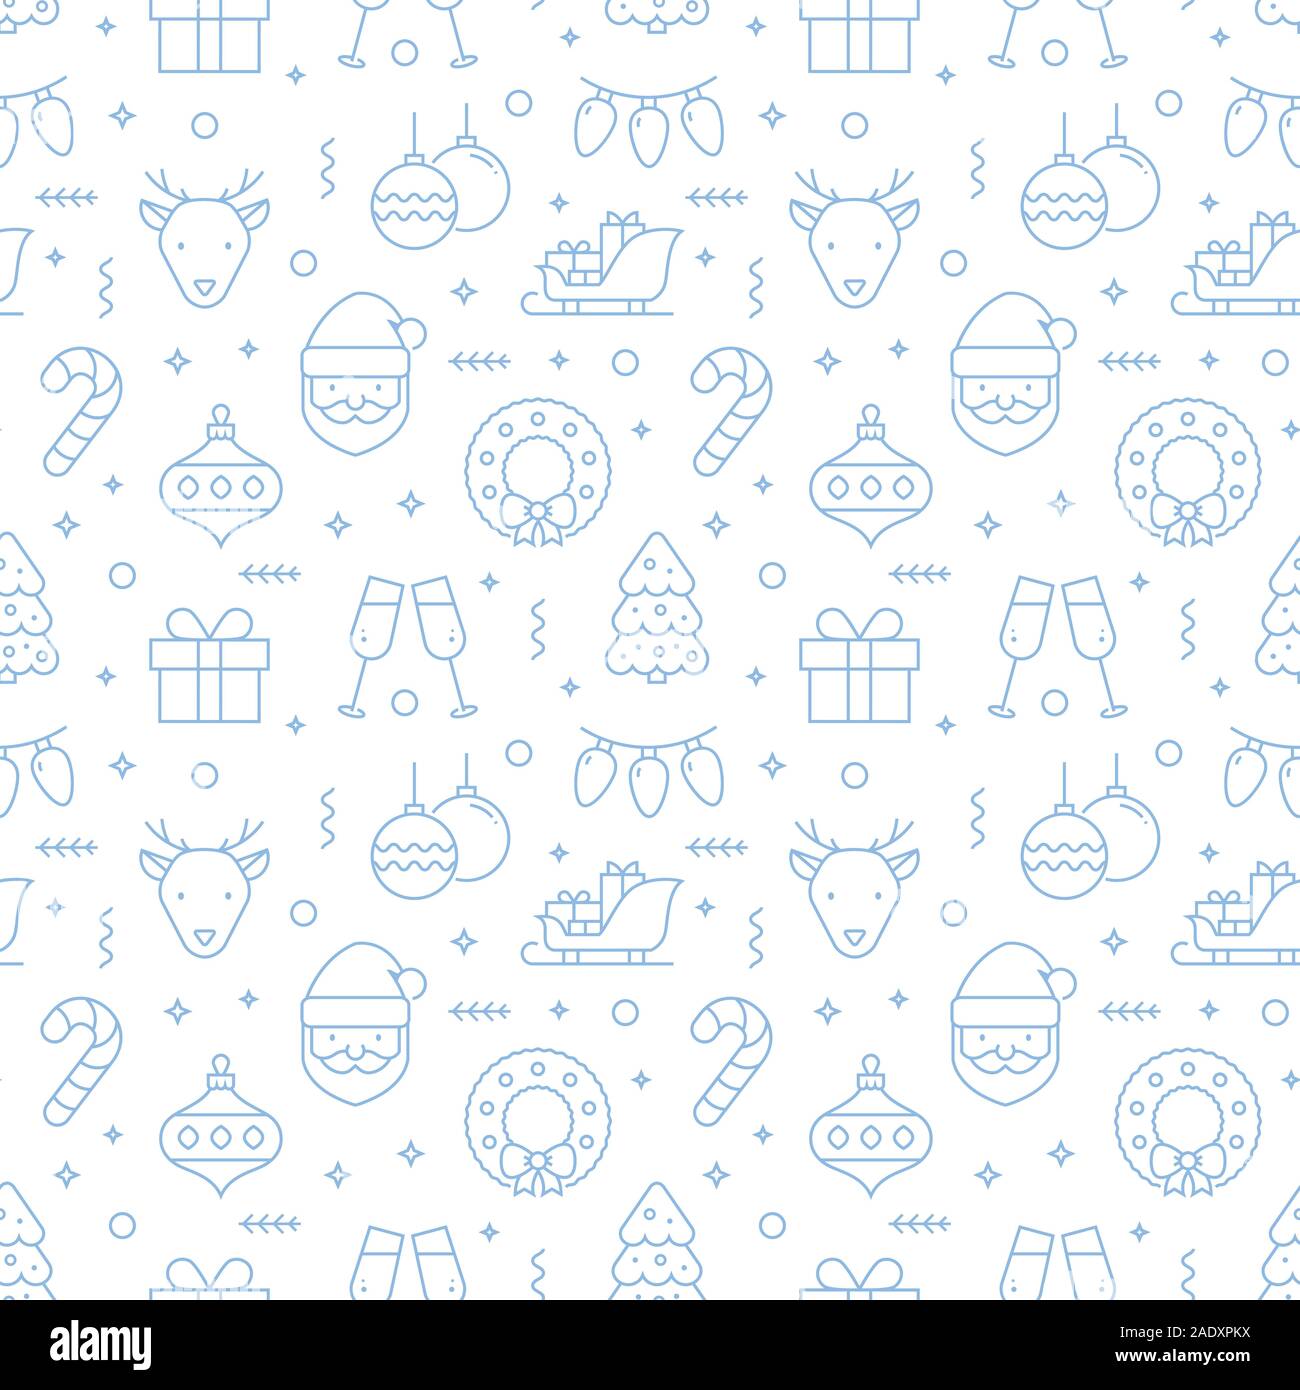 Christmas seamless pattern with line icons. Vector illustration with pale blue holiday symbols on a white background. Stock Vector